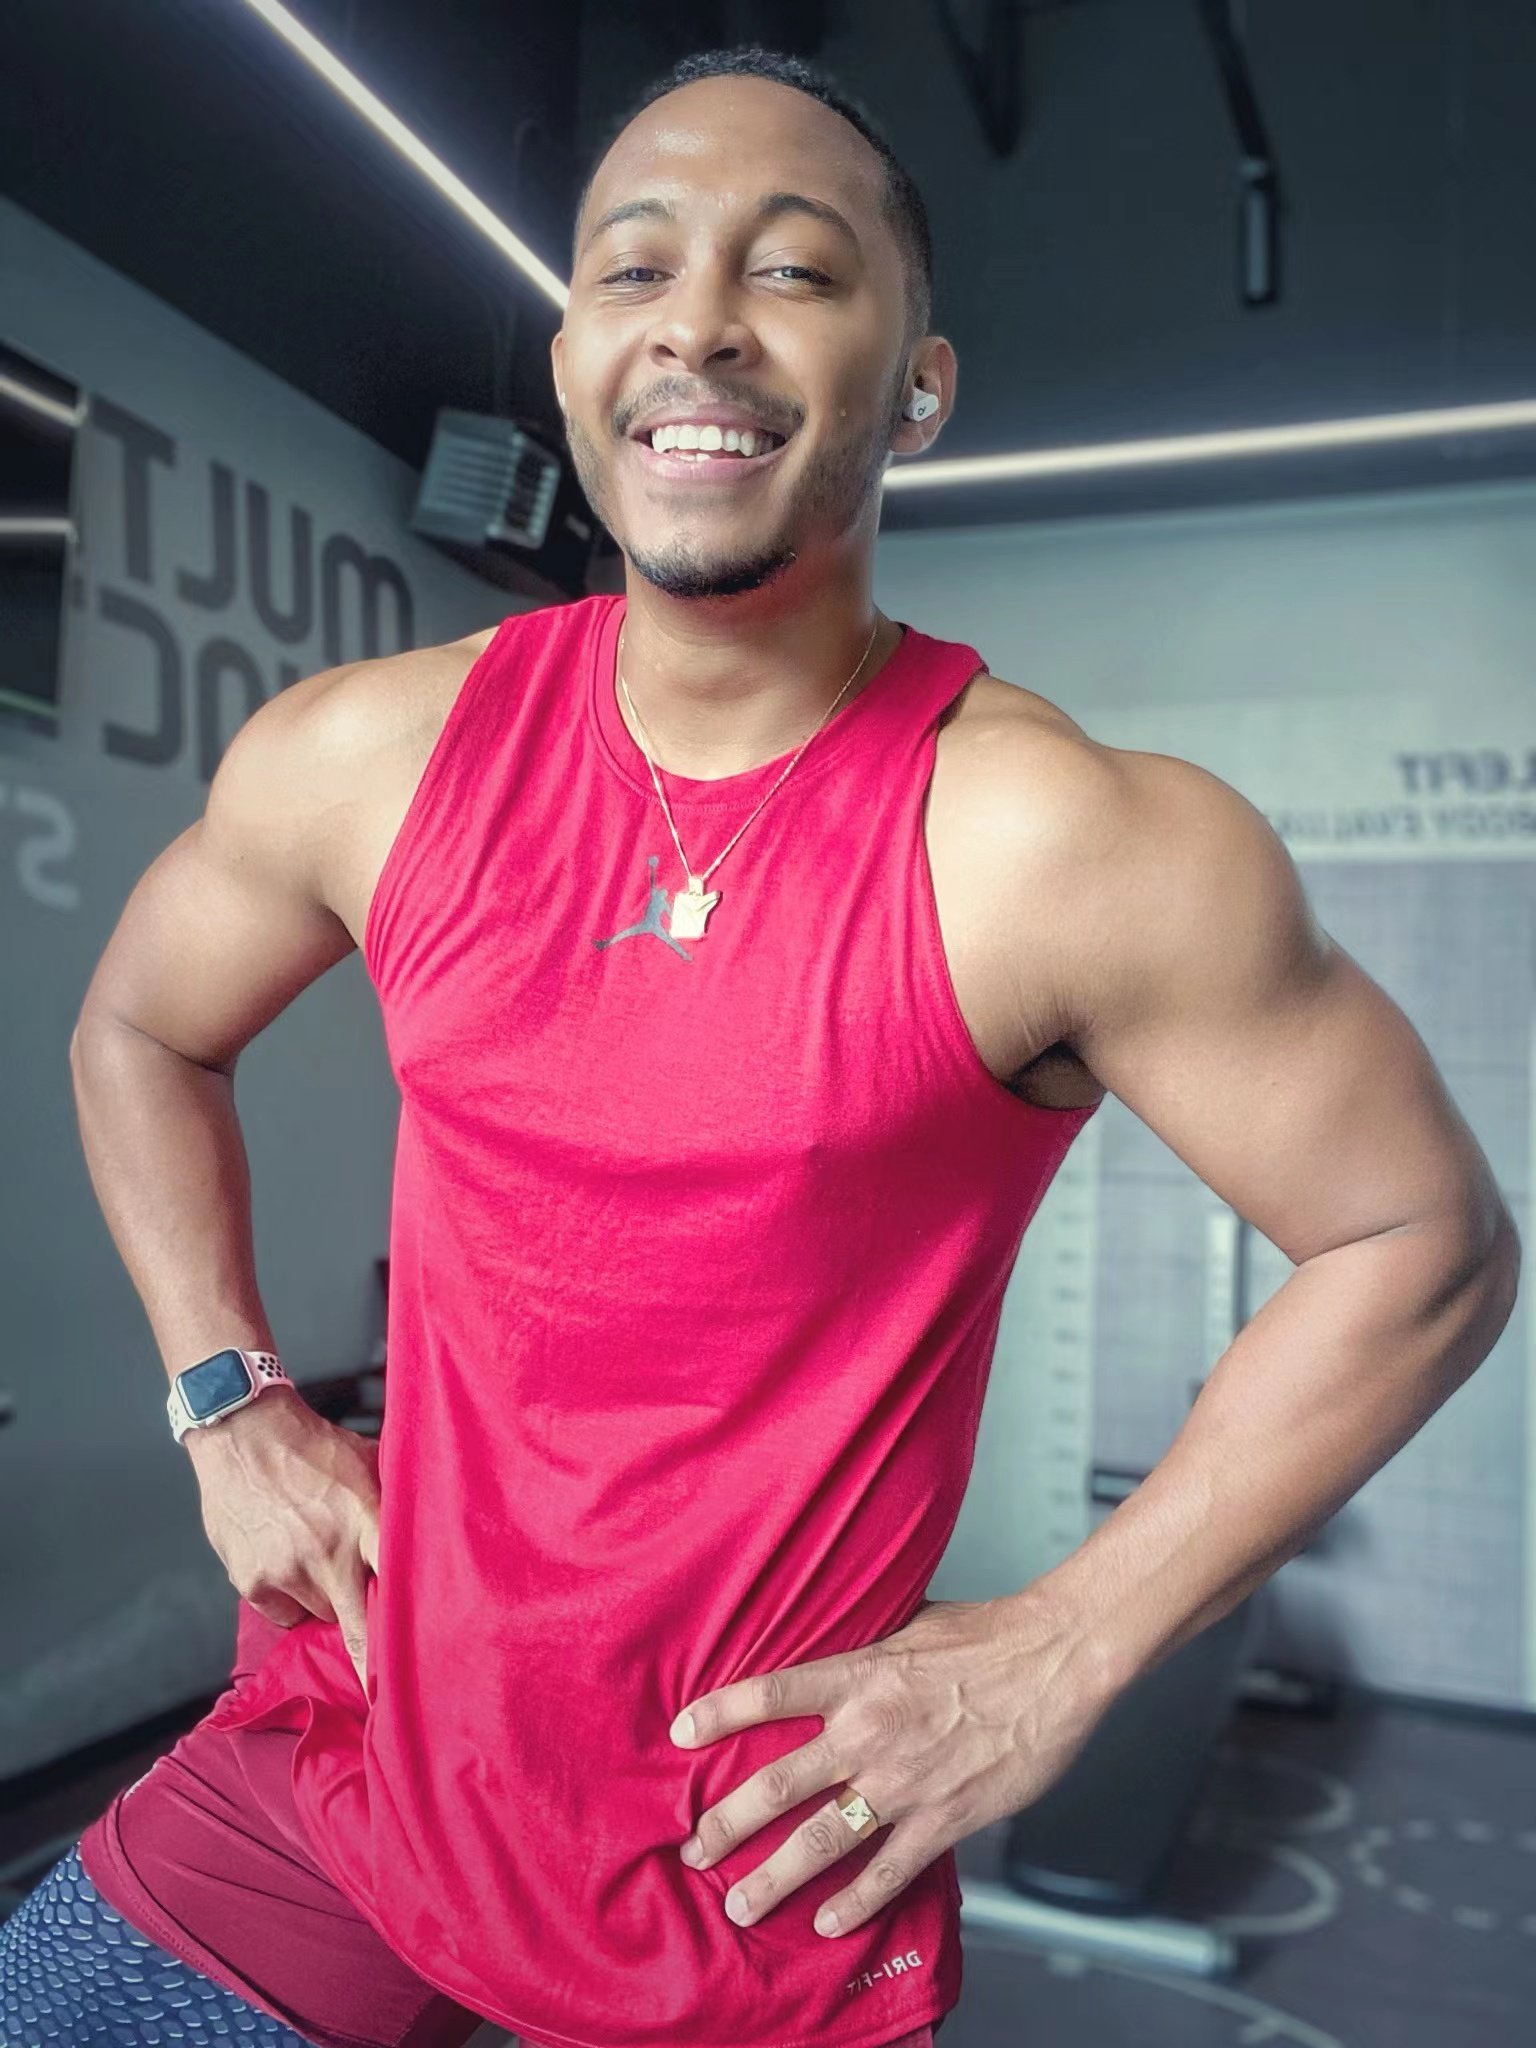 Fasting aids weight loss – but while it has helped some like Christian François (pictured) achieve their fitness goals, others have seen an increase in problems with their health. 